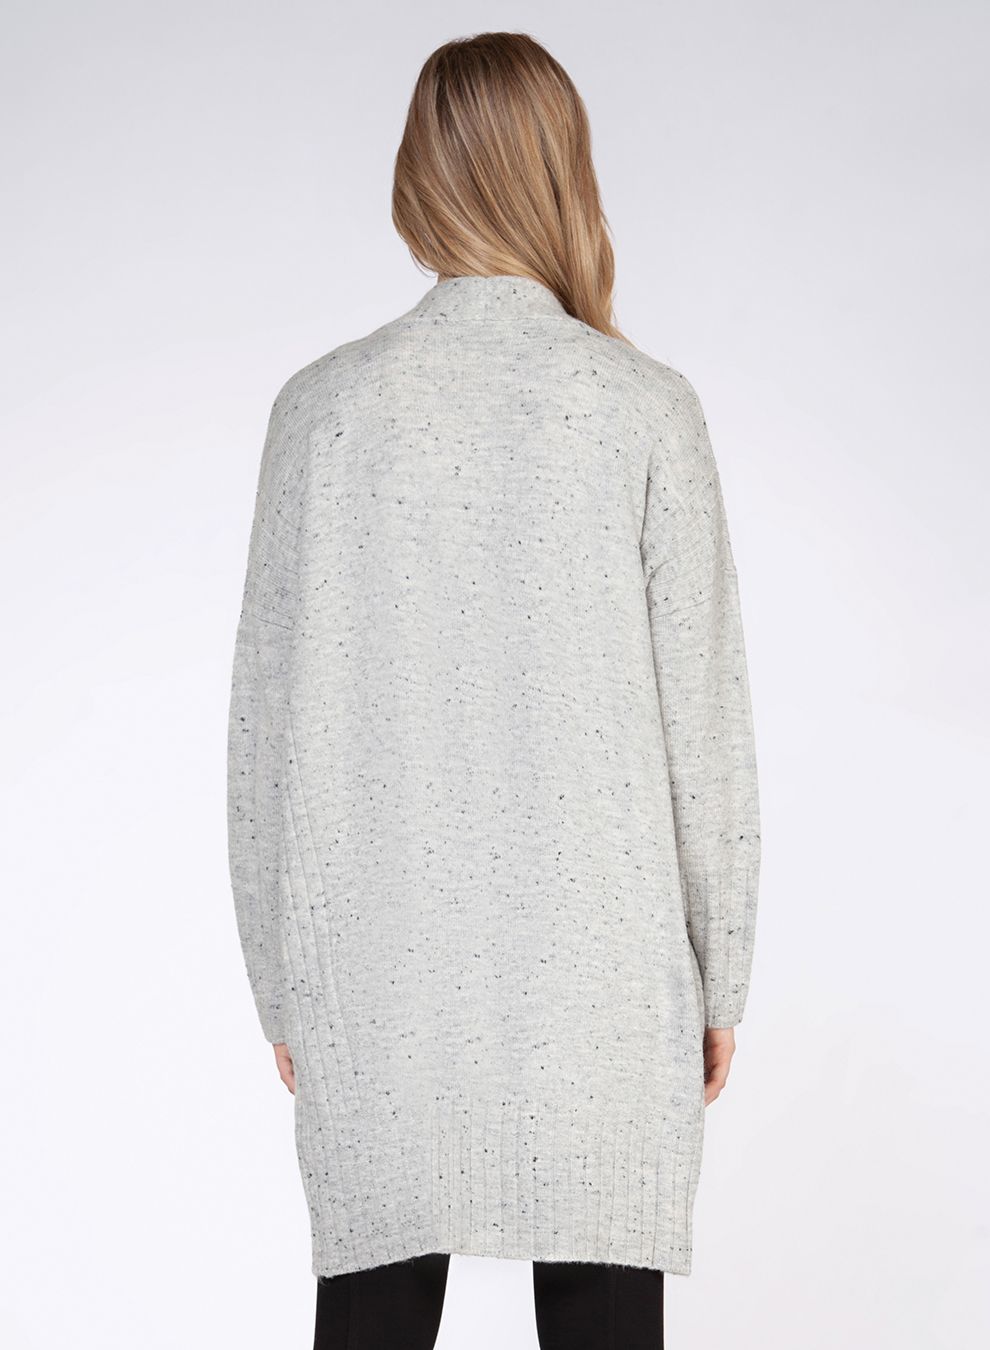 Speckled Grey Open Front Cardigan Sweater